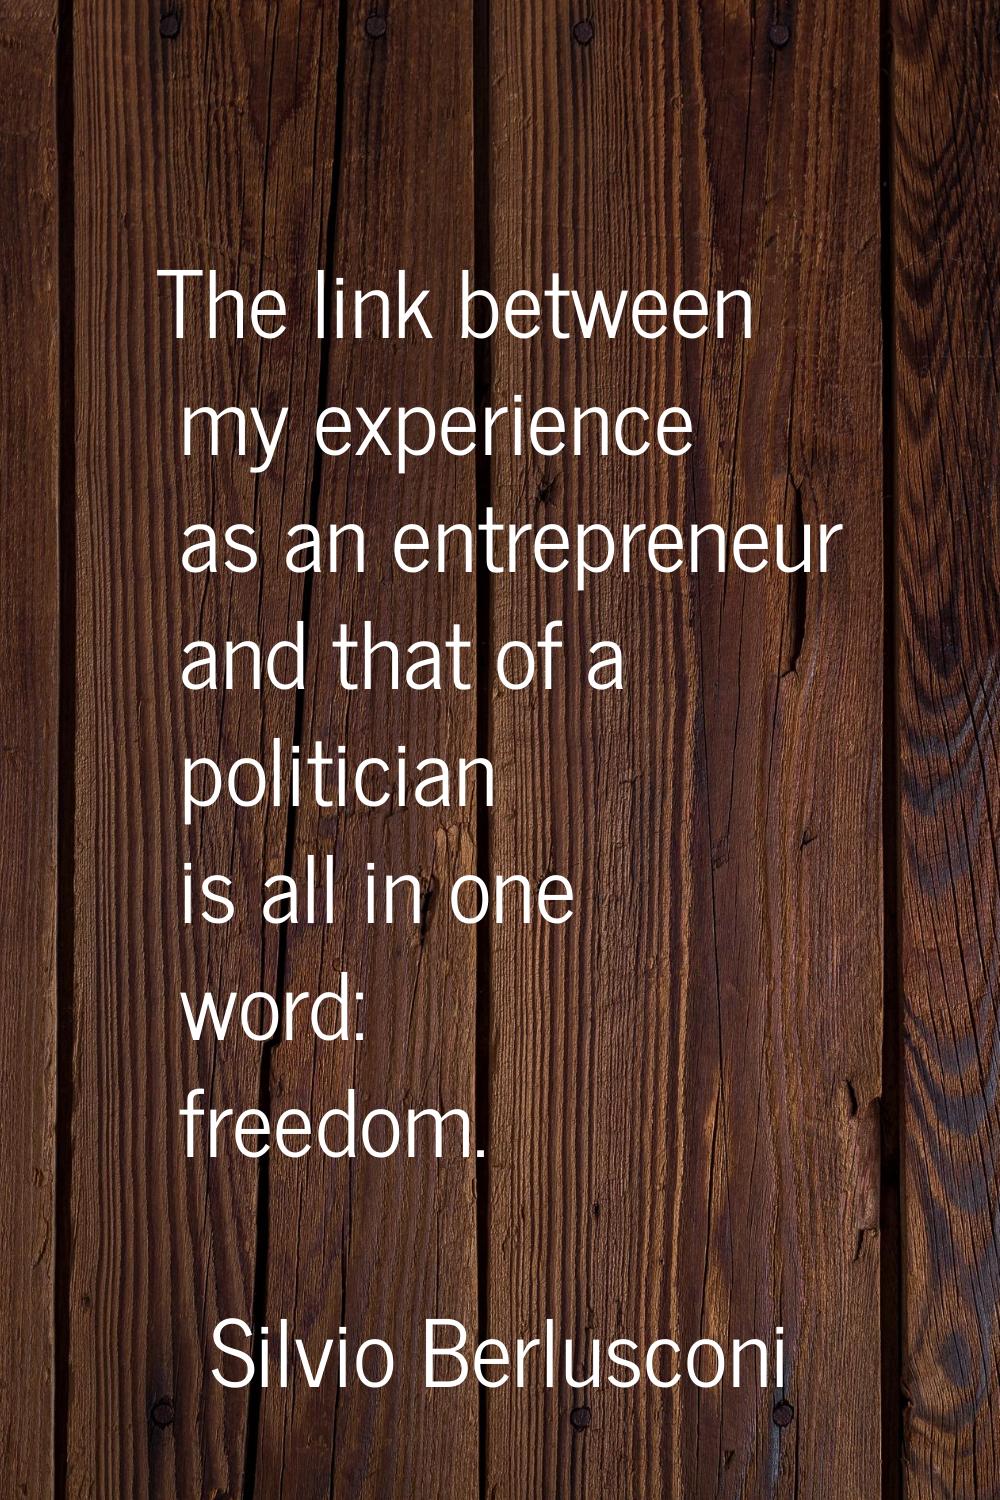 The link between my experience as an entrepreneur and that of a politician is all in one word: free